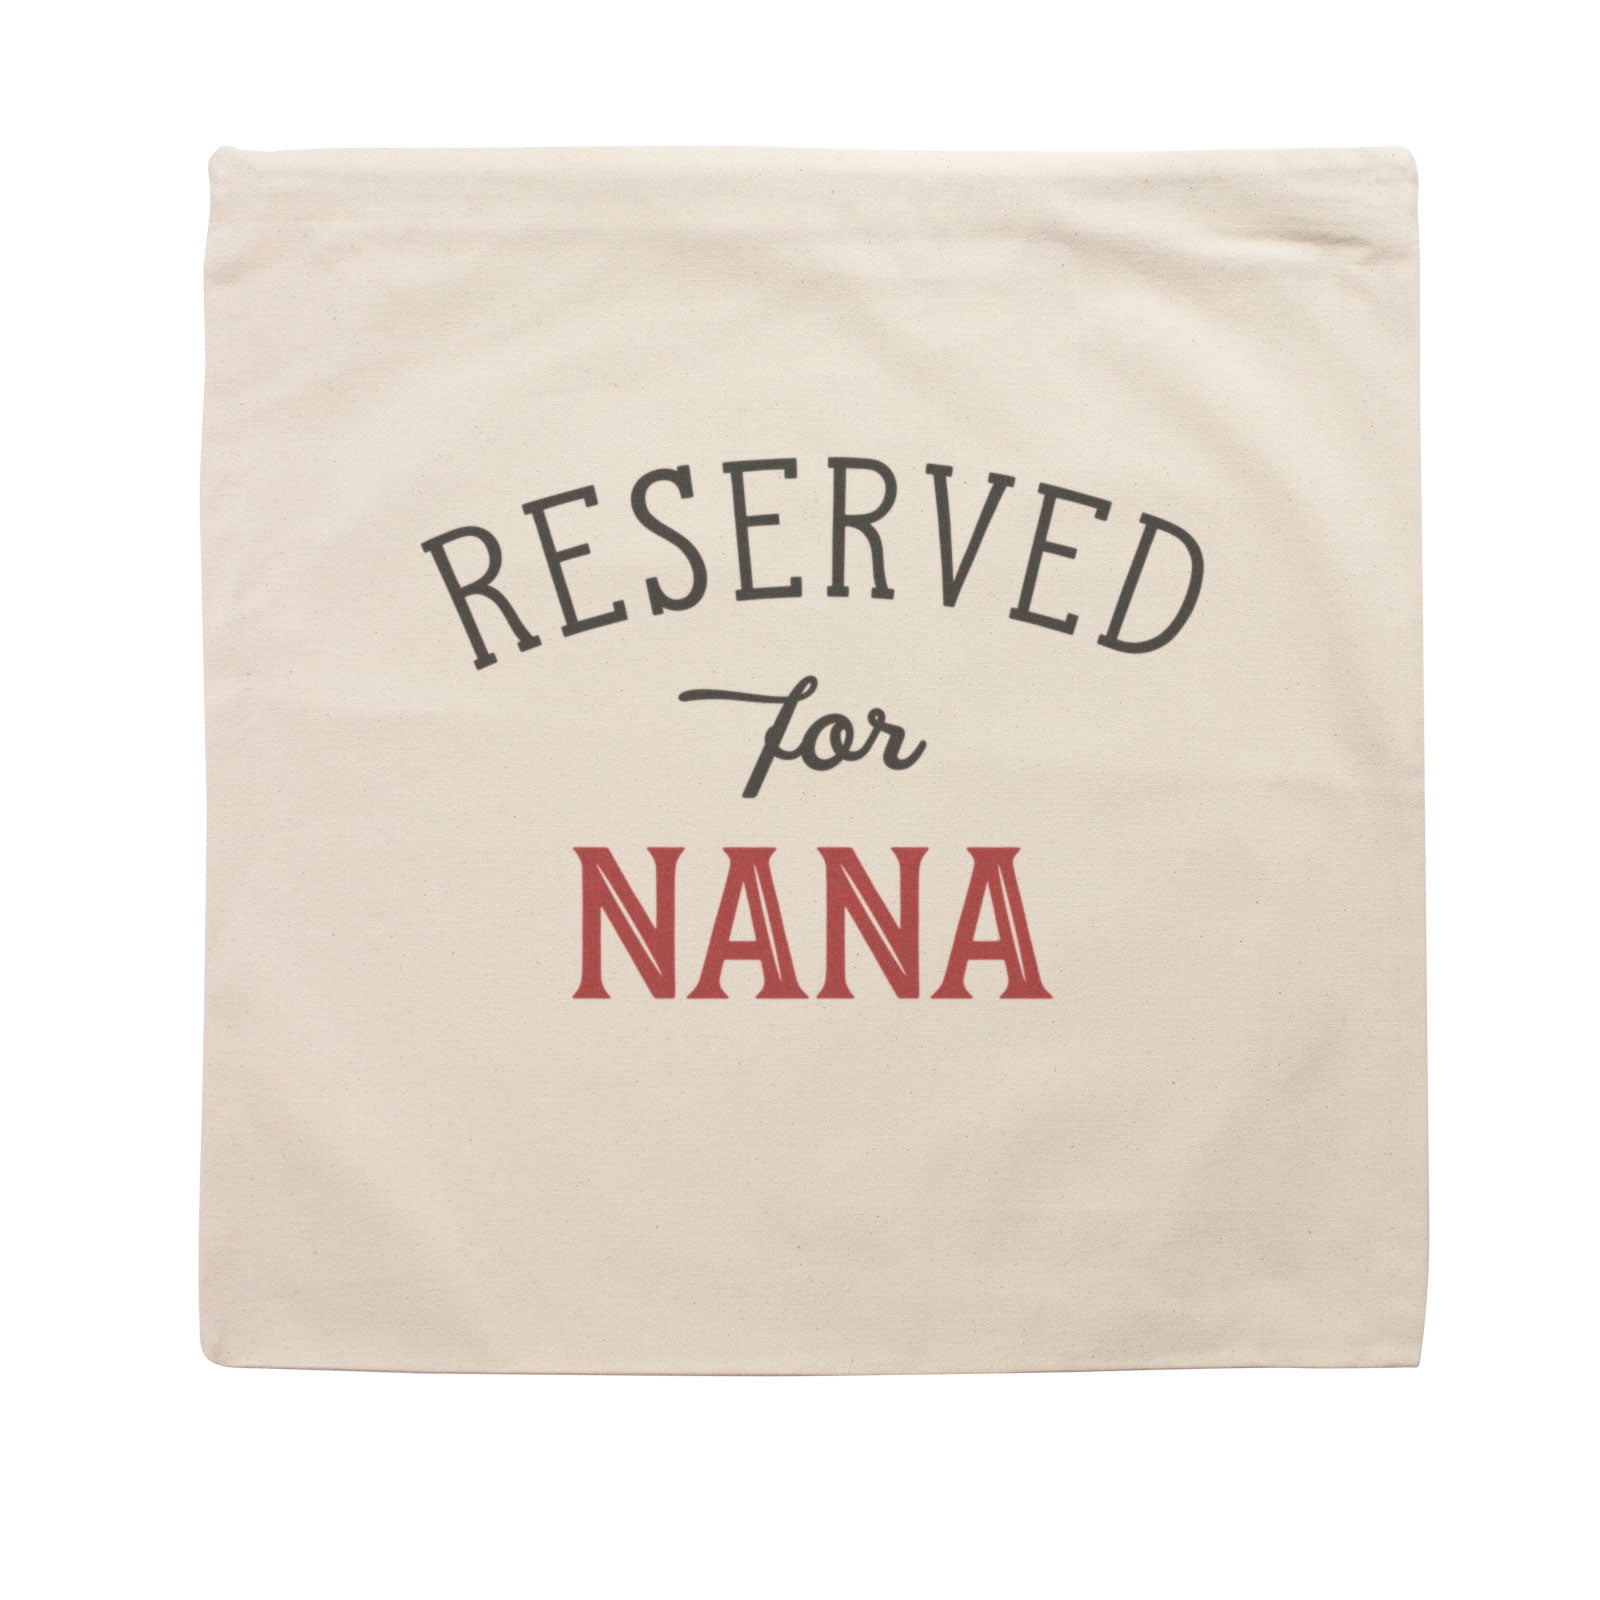 Reserved for Nana Cushion Cover